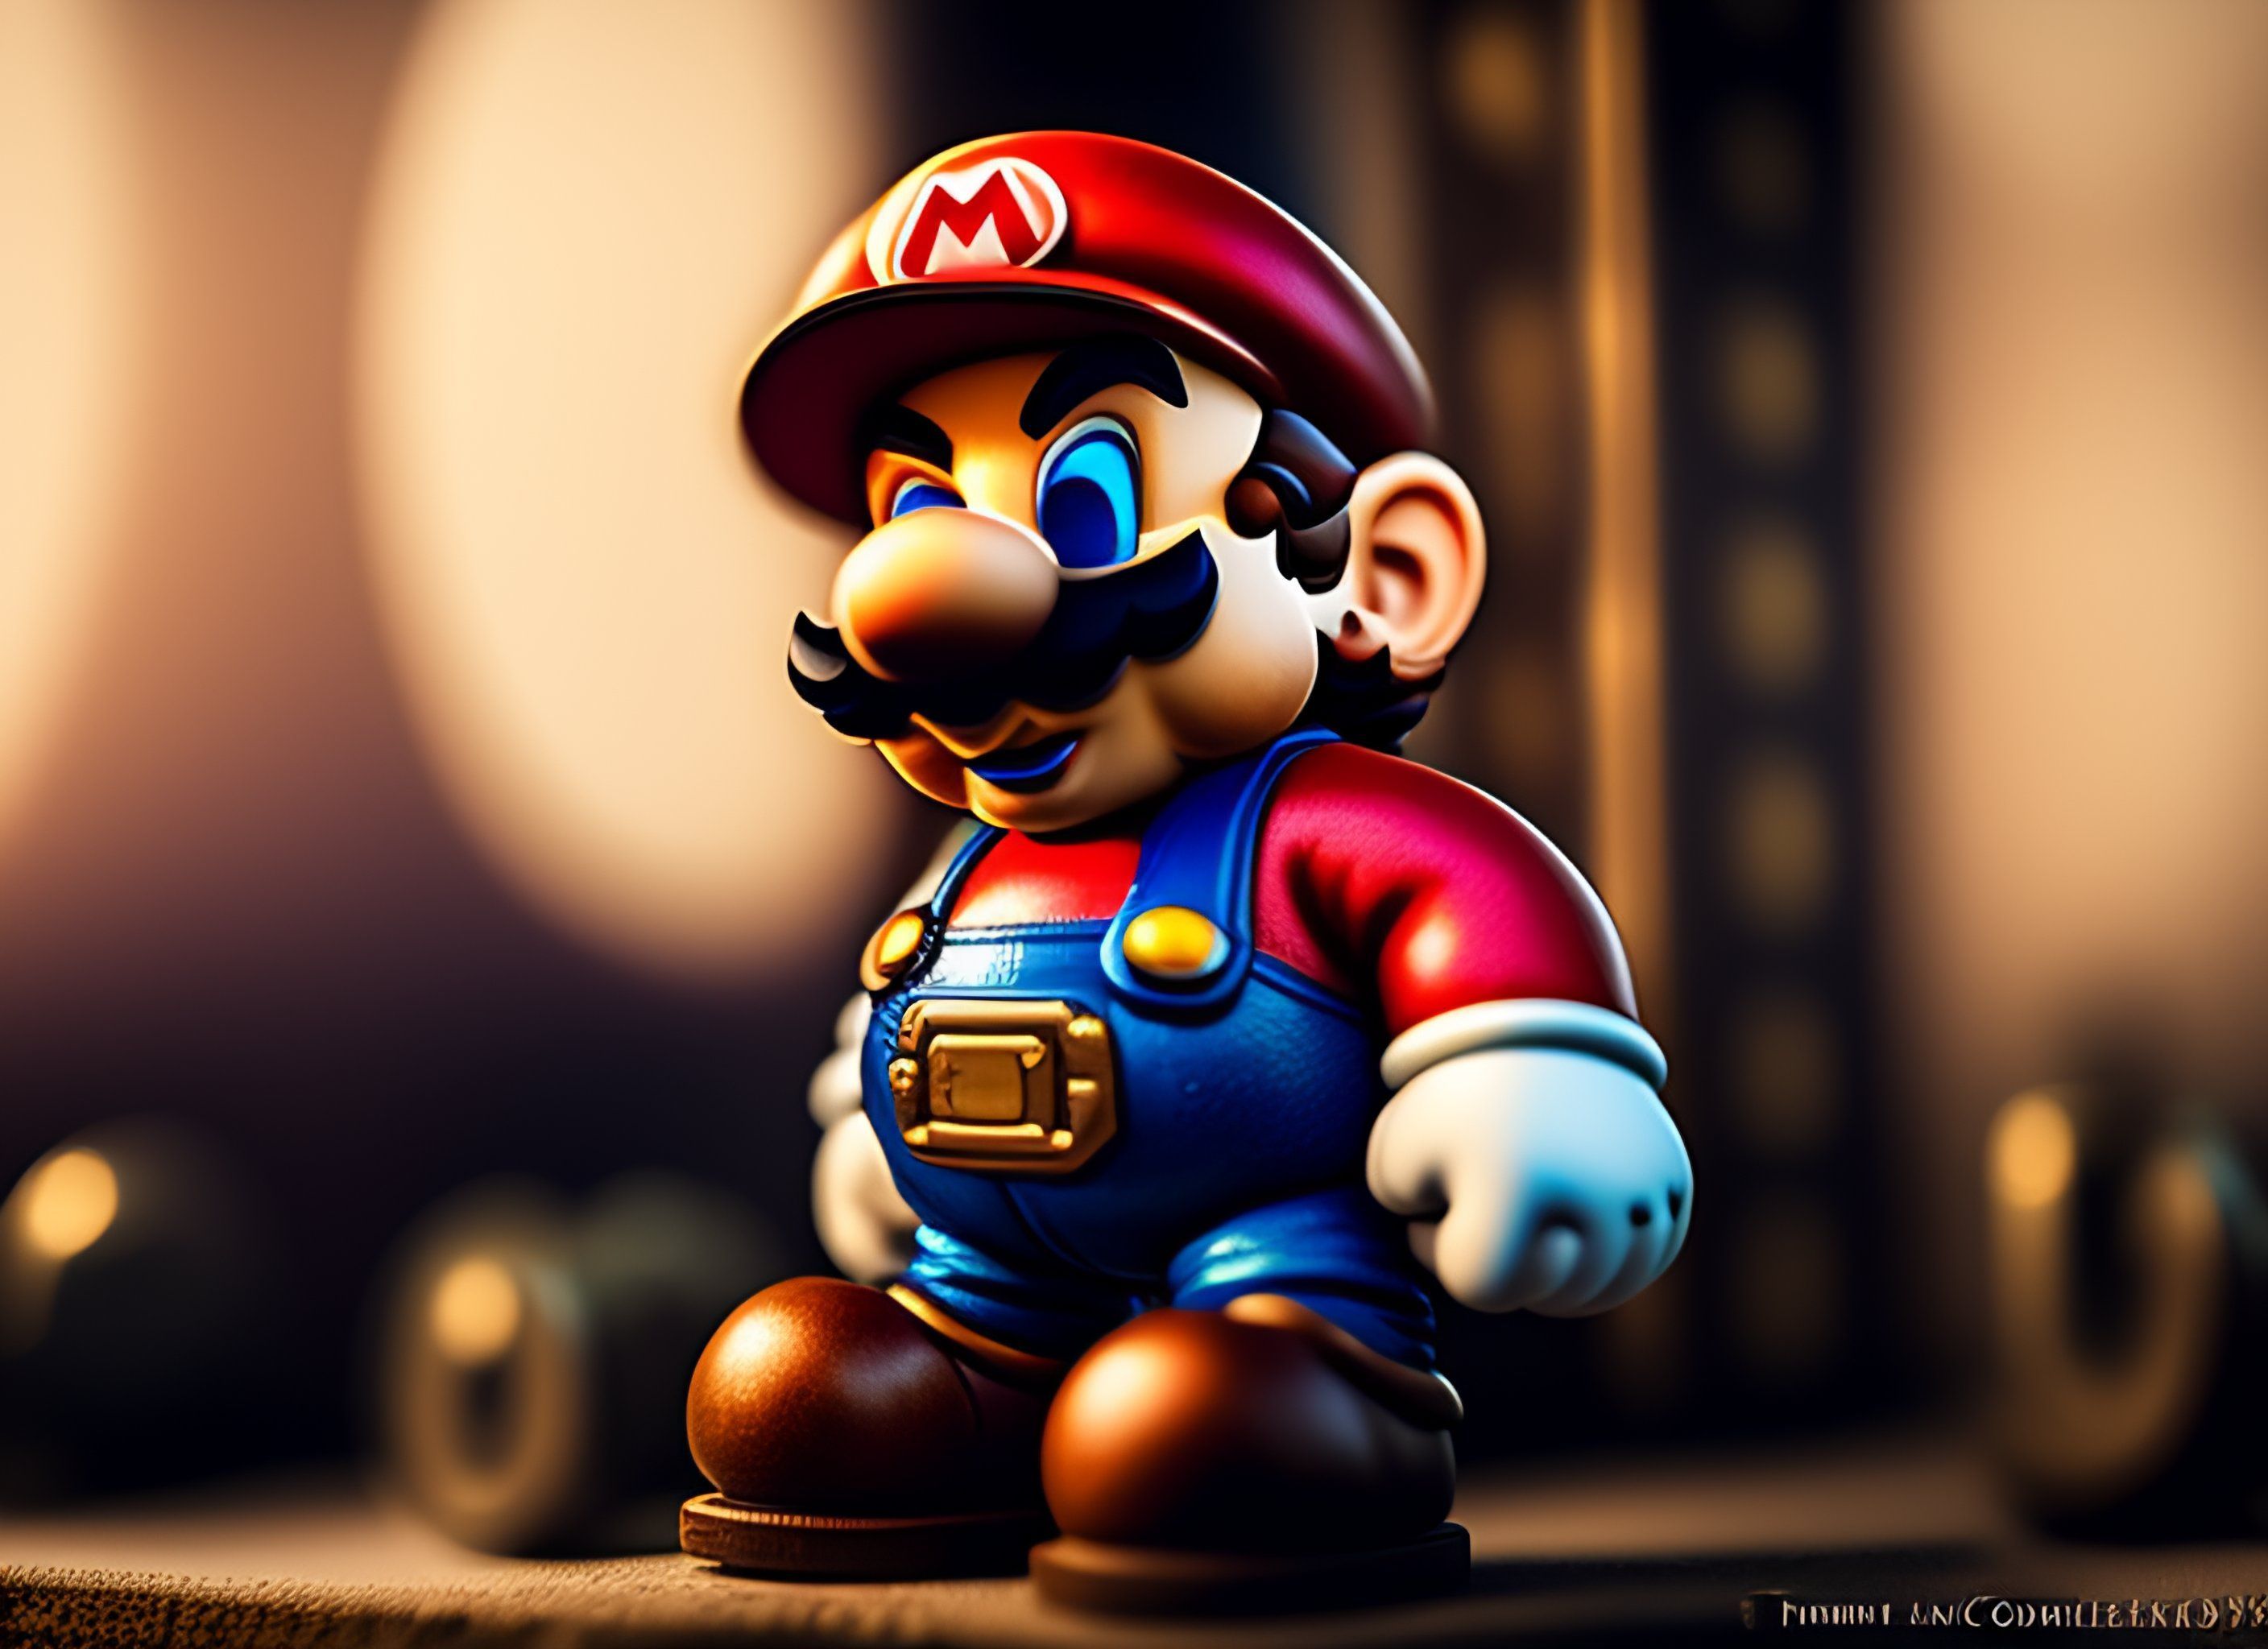 Mario, the famous video game character, standing on a table - Super Mario